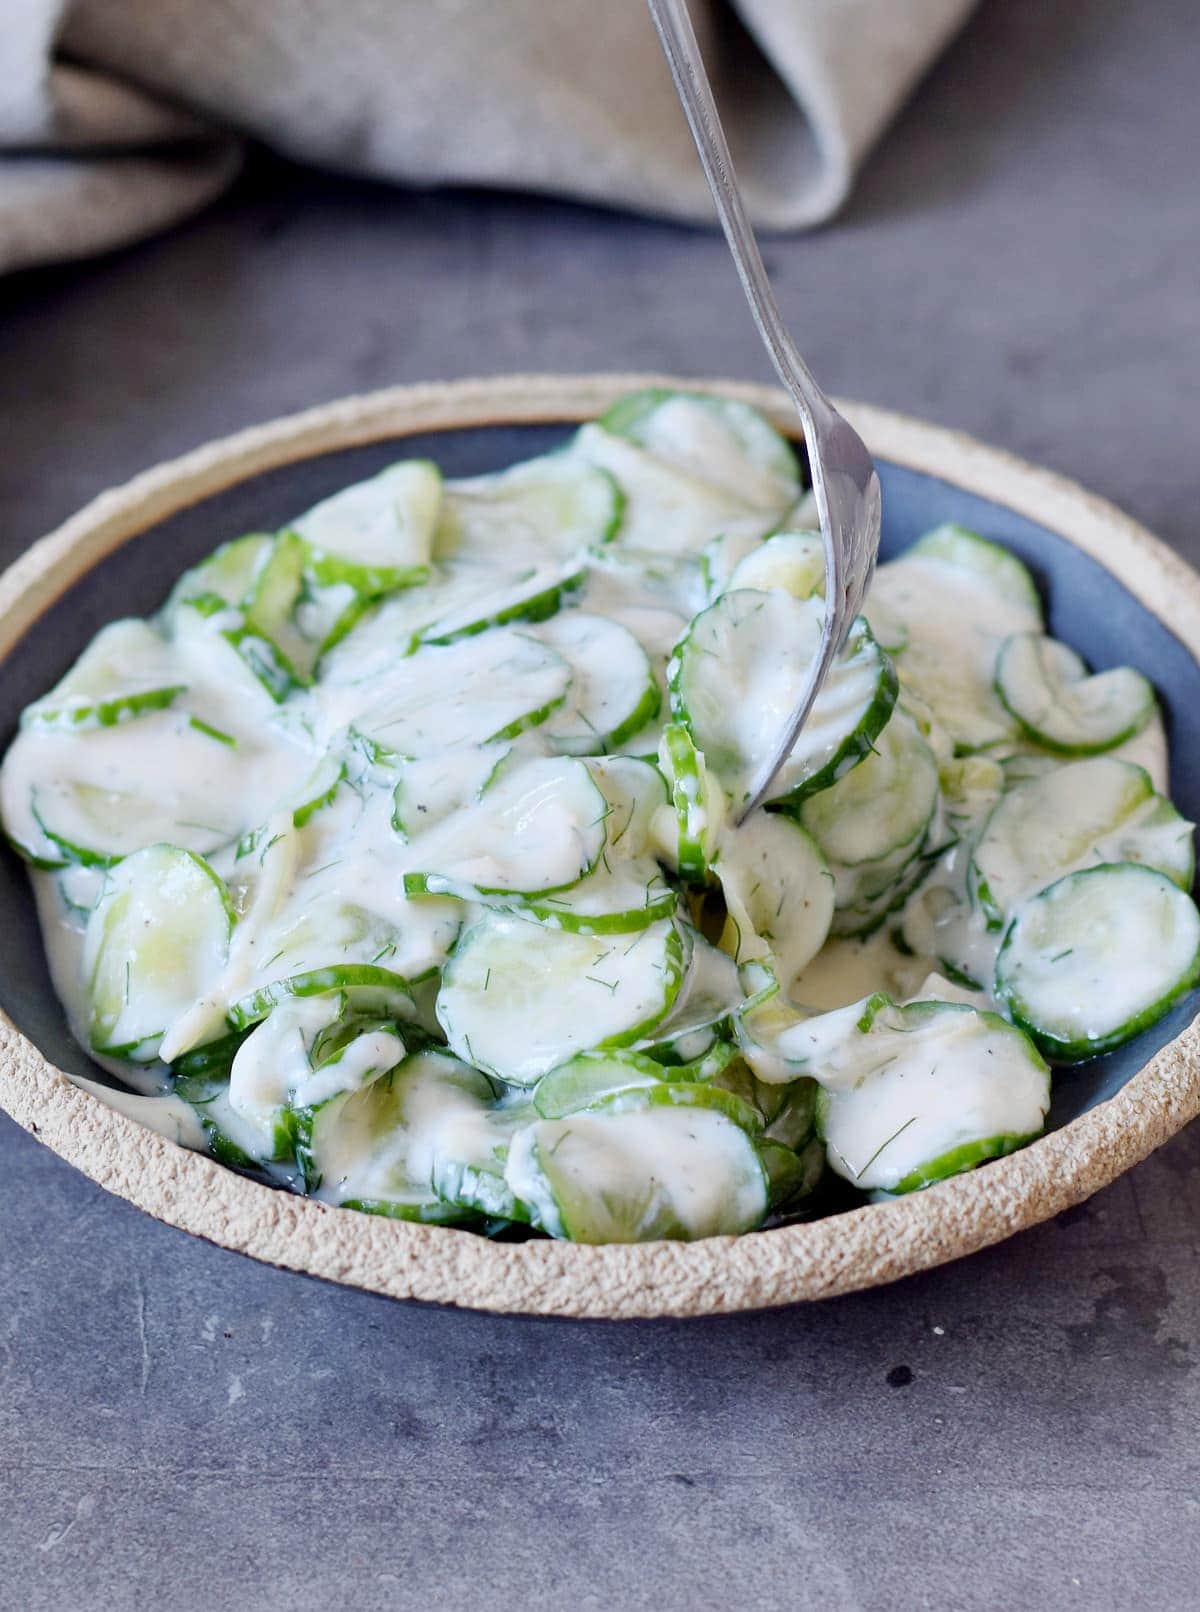 Creamy cucumber salad with vegan dressing on a black plate